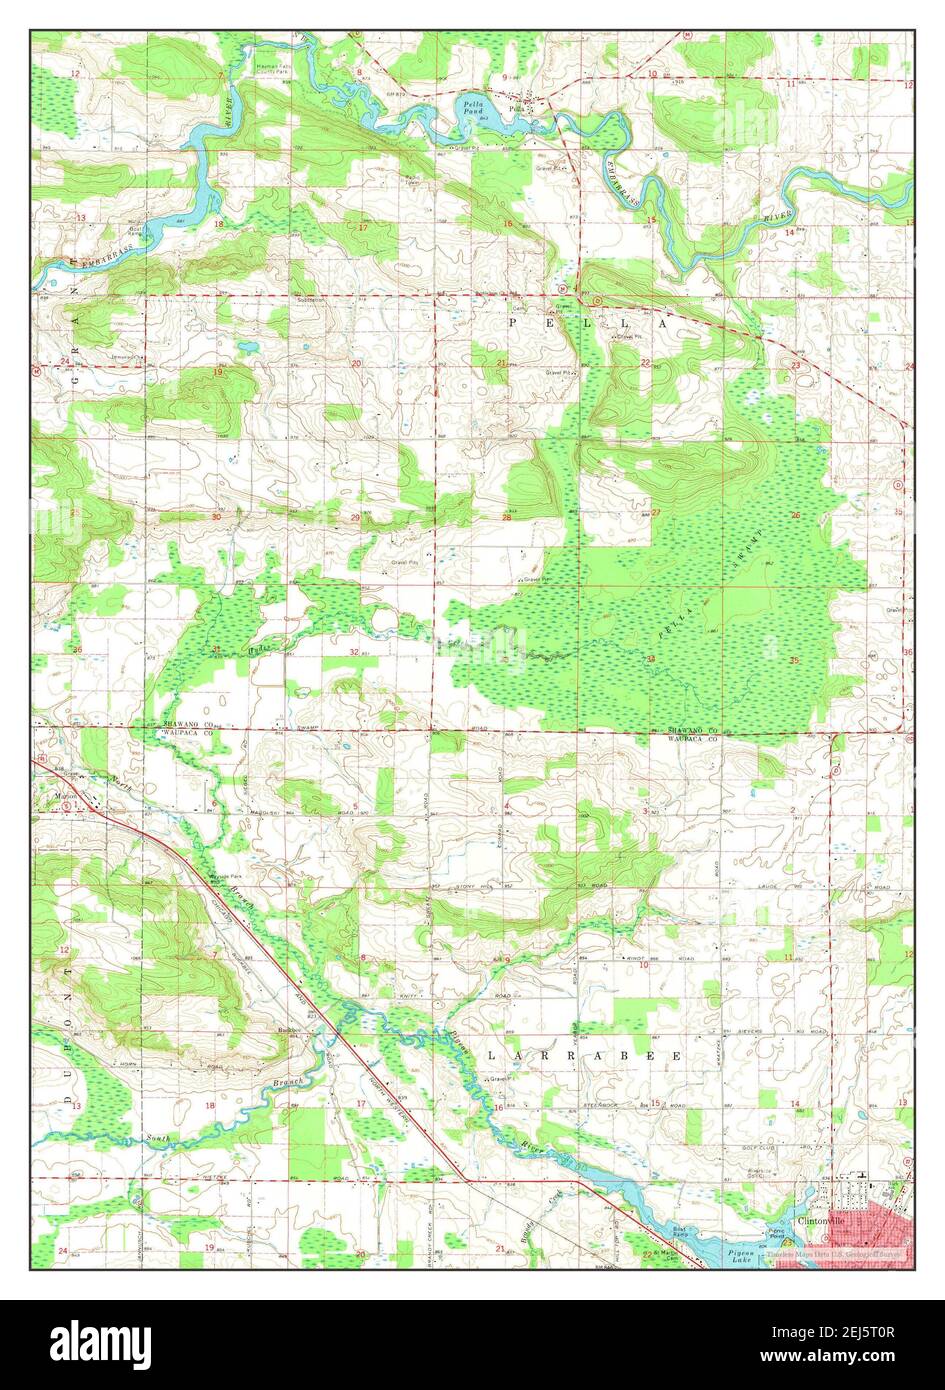 Clintonville North, Wisconsin, map 1970, 1:24000, United States of America by Timeless Maps, data U.S. Geological Survey Stock Photo